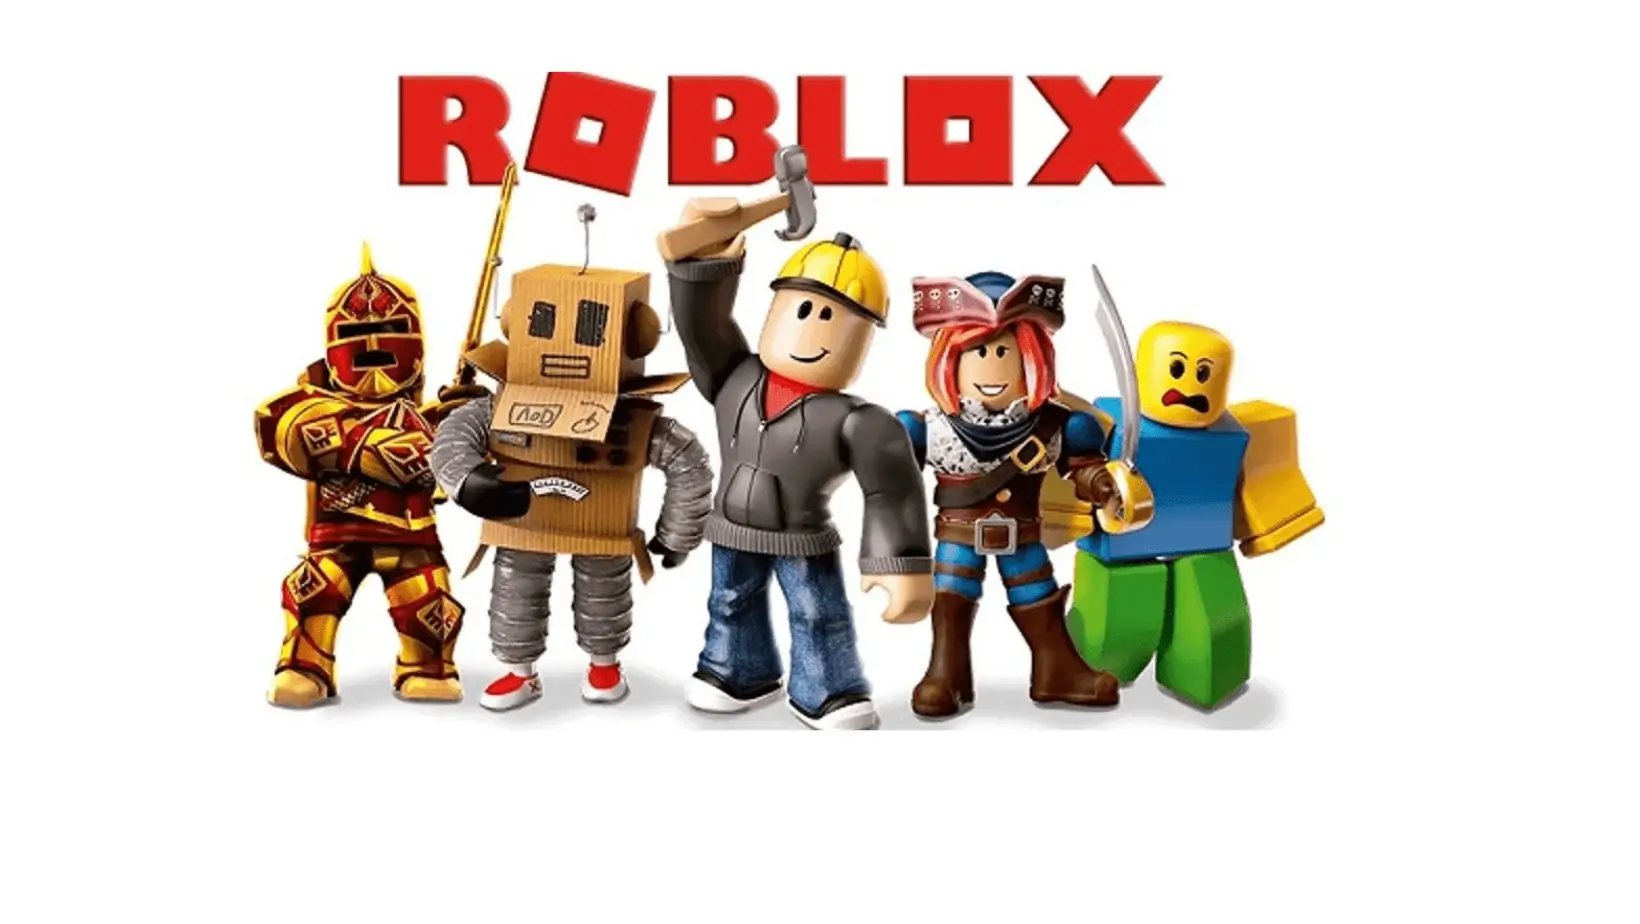 Roblox Arrives on Meta Quest: VR Gaming Revolution!